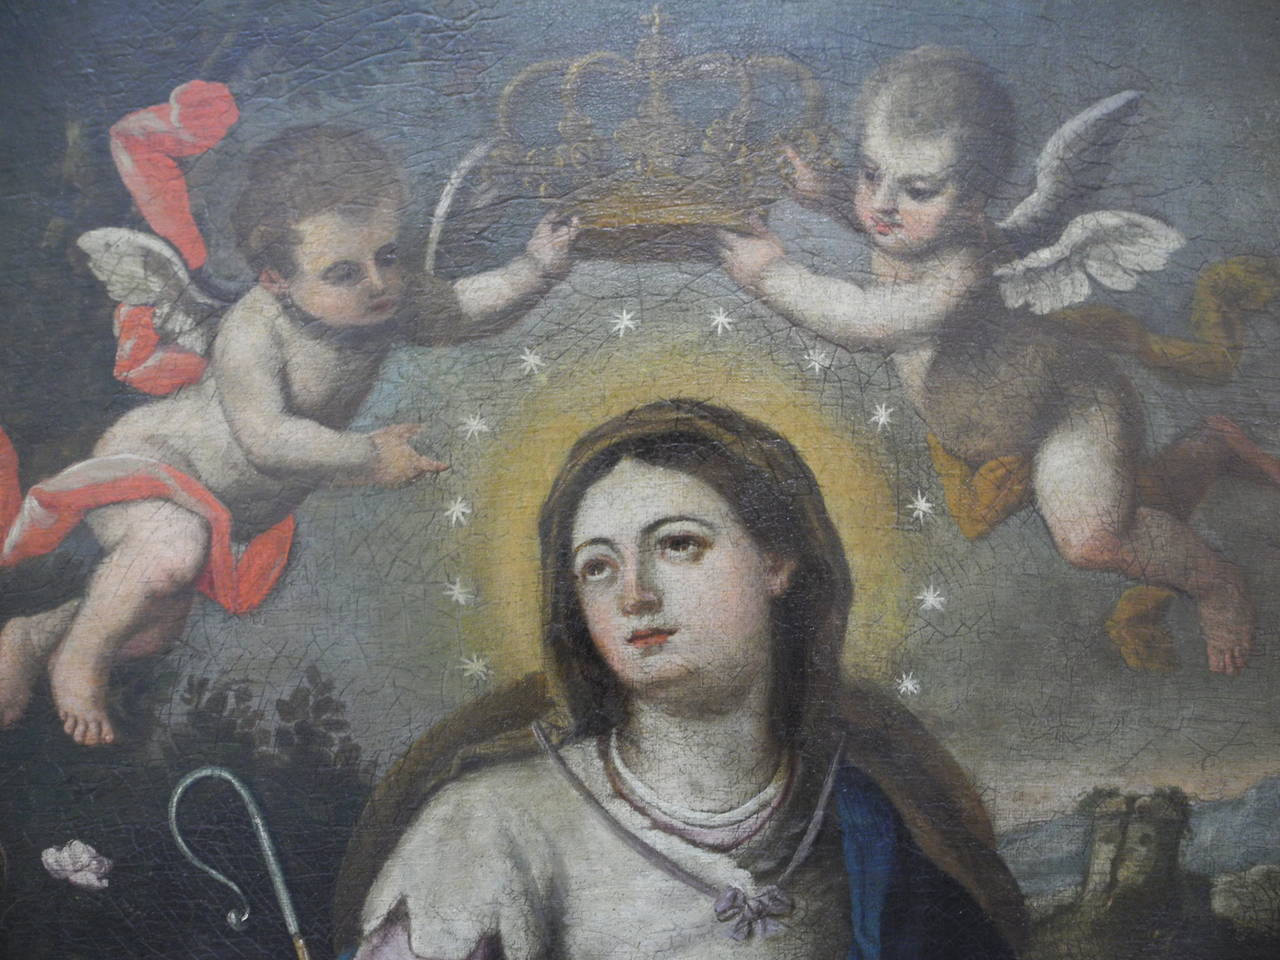 17th century religious painting of the Virgin Mary from Naples, Italy. The subject’s head is surrounded by a halo of 12 stars. According to the story of the Marian Assumption, Mary was assumed into heaven with a halo of stars. 

Upon her